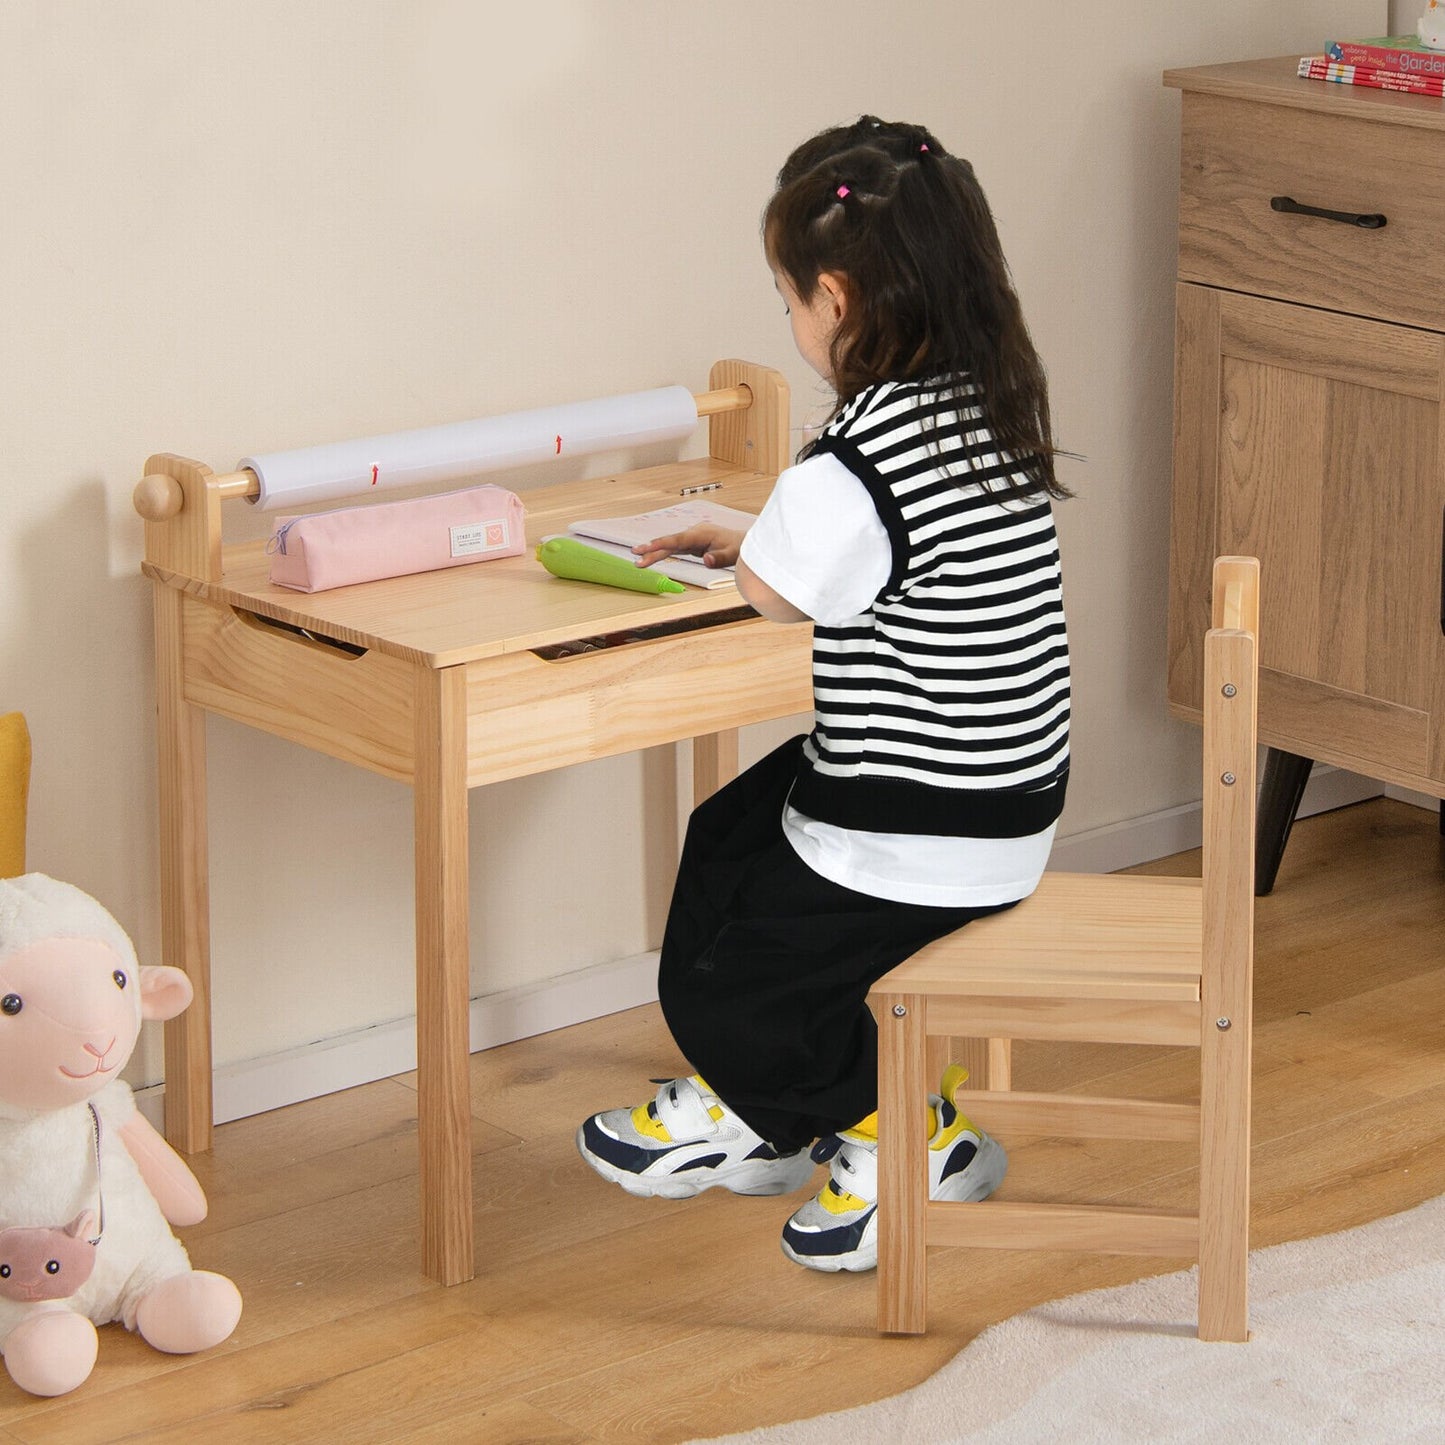 Toddler Multifunctional Activity Table and Chair Set with Paper Roll Holder, Natural